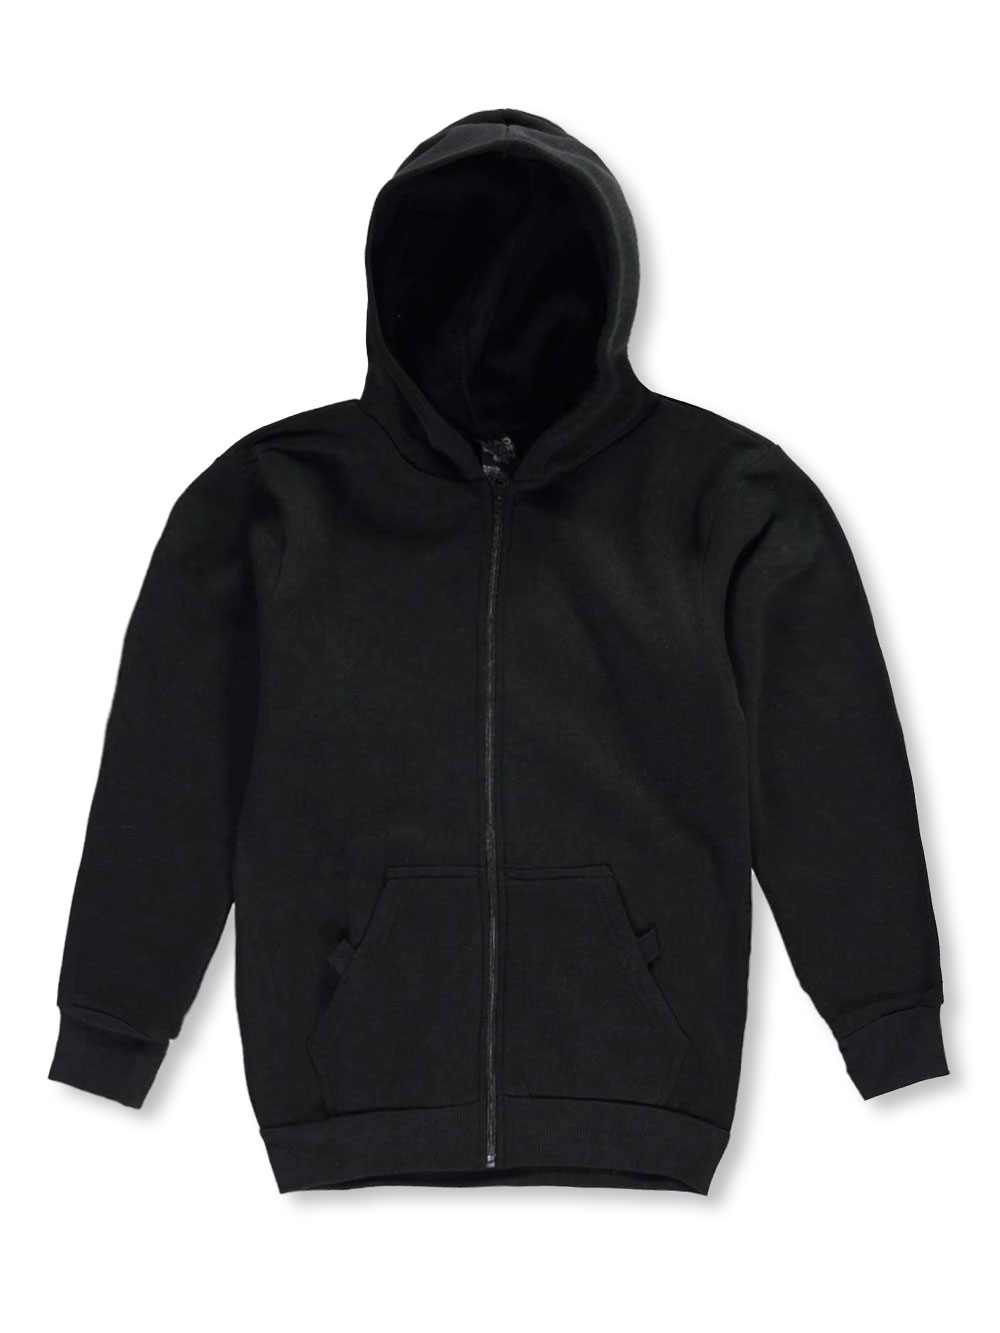 Size 4 Hoodies for Boys